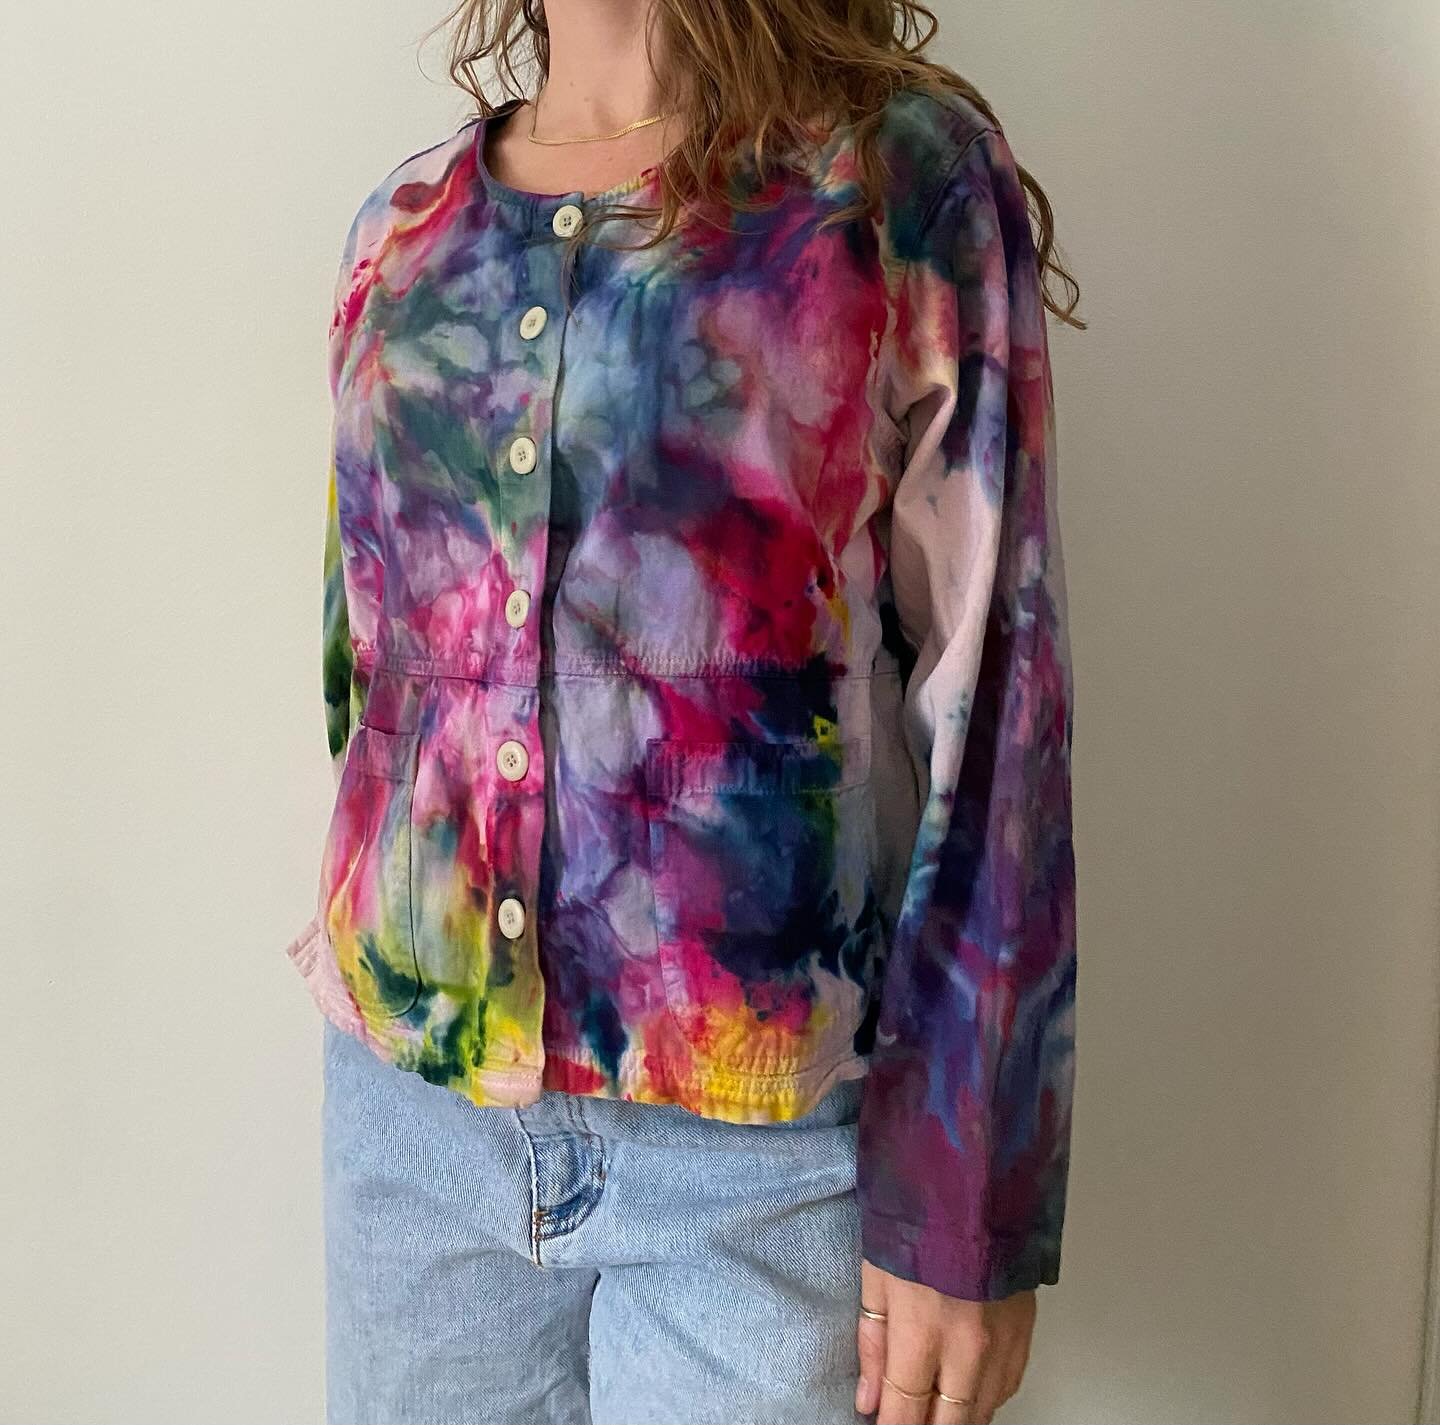 rainbow cotton jacket re-explored 🌈
44&rdquo; chest, 22&rdquo; length

Size large women&rsquo;s 

100% cotton

Re-explored takes vintage pieces and transforms them into something new to extend the life cycle of the garment and keep more textiles out